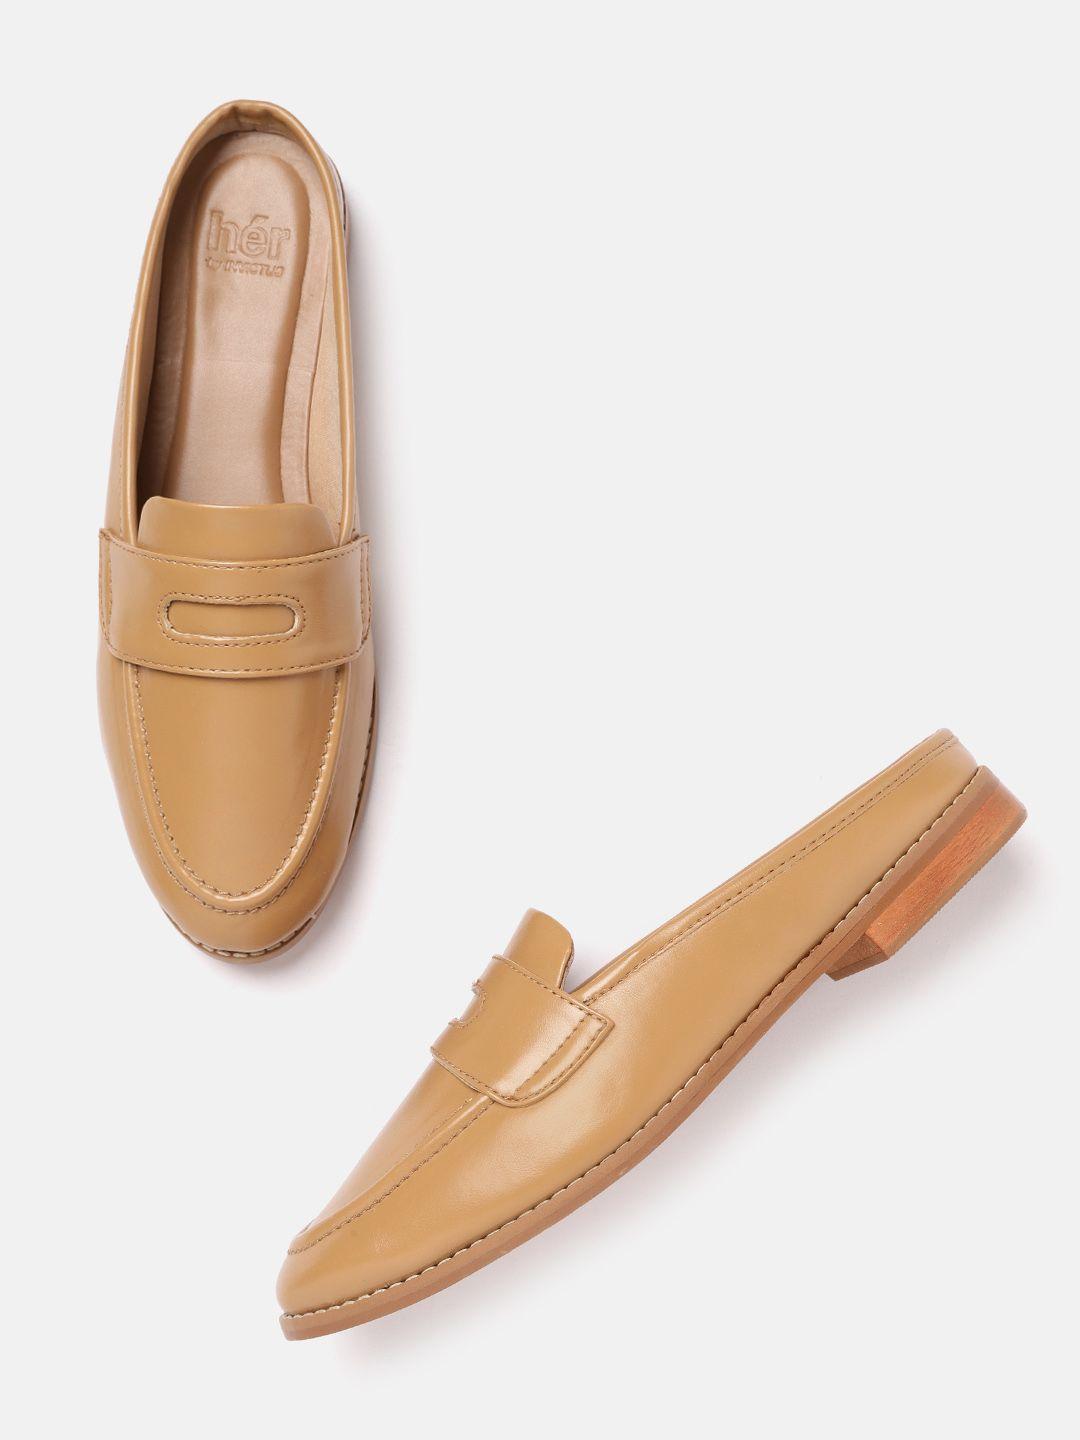 her by invictus women solid camel brown mules